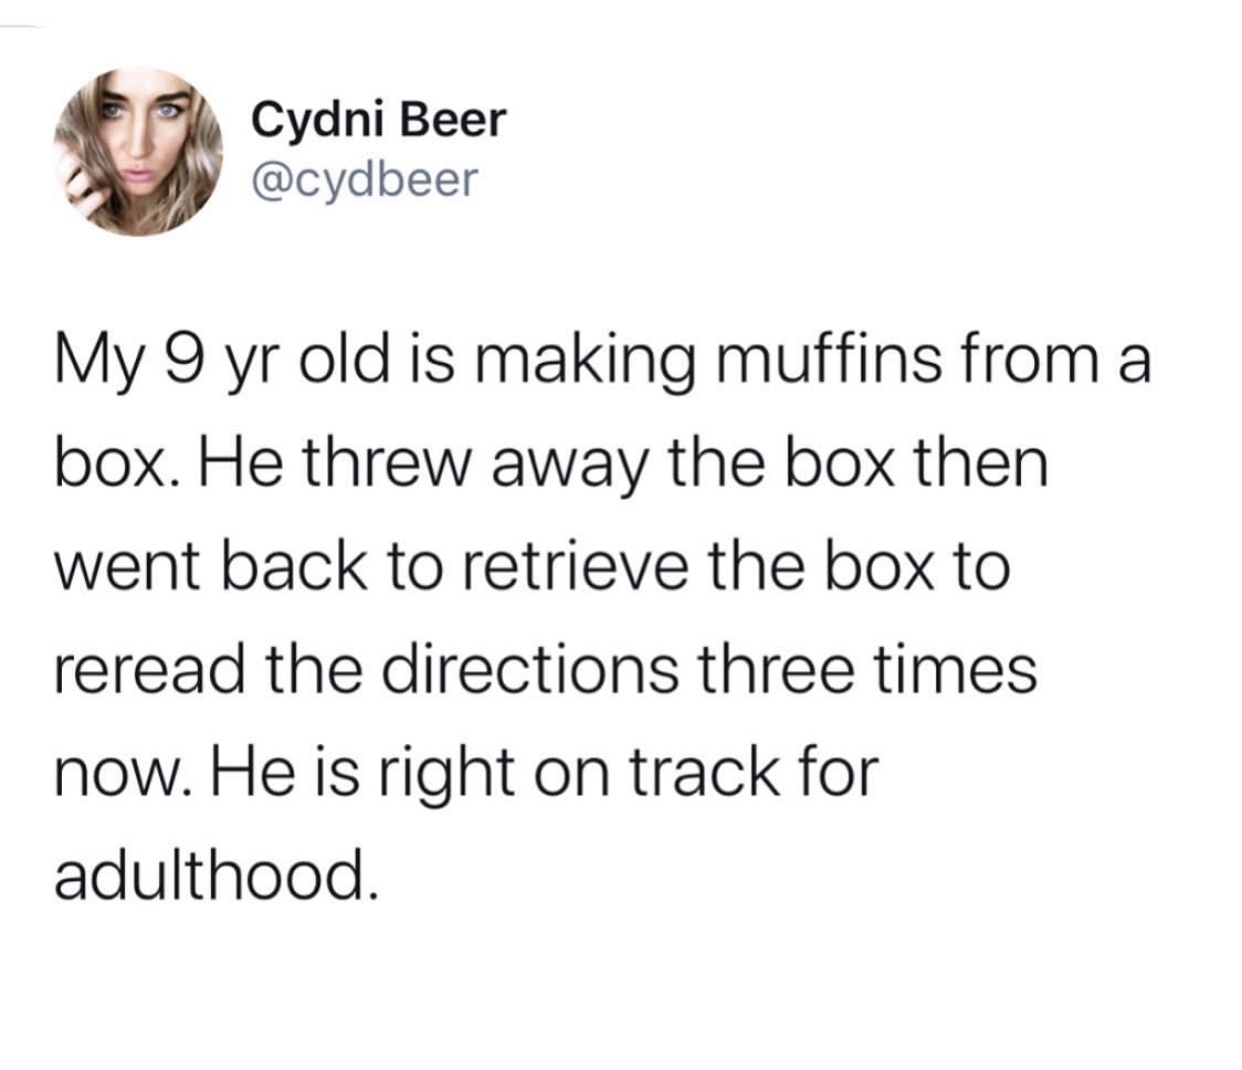 social justice bard - Cydni Beer My 9 yr old is making muffins from a box. He threw away the box then went back to retrieve the box to reread the directions three times now. He is right on track for adulthood.